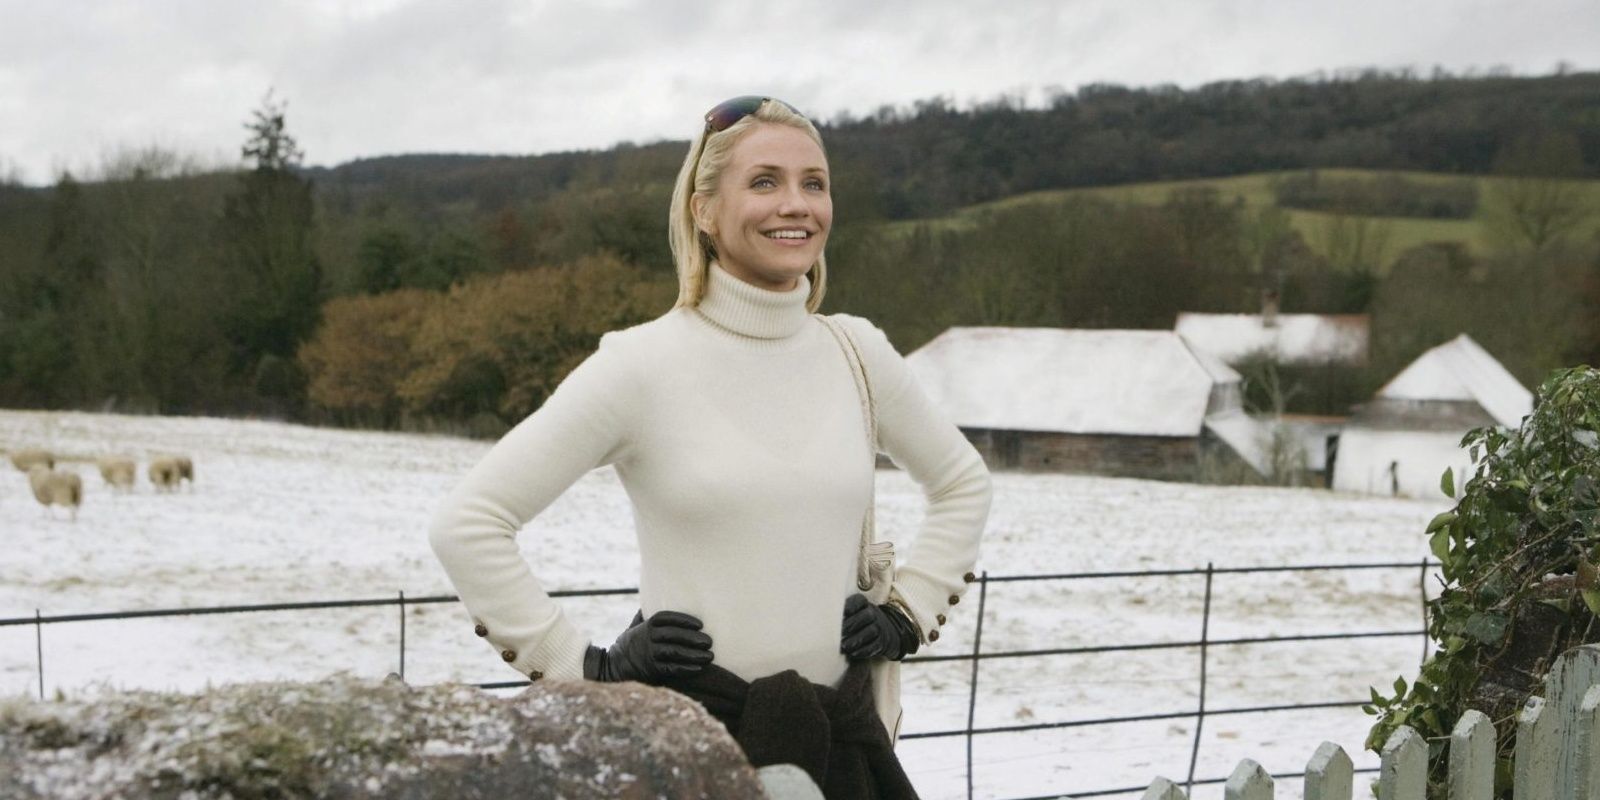 Amanda standing in the English countryside in The Holiday